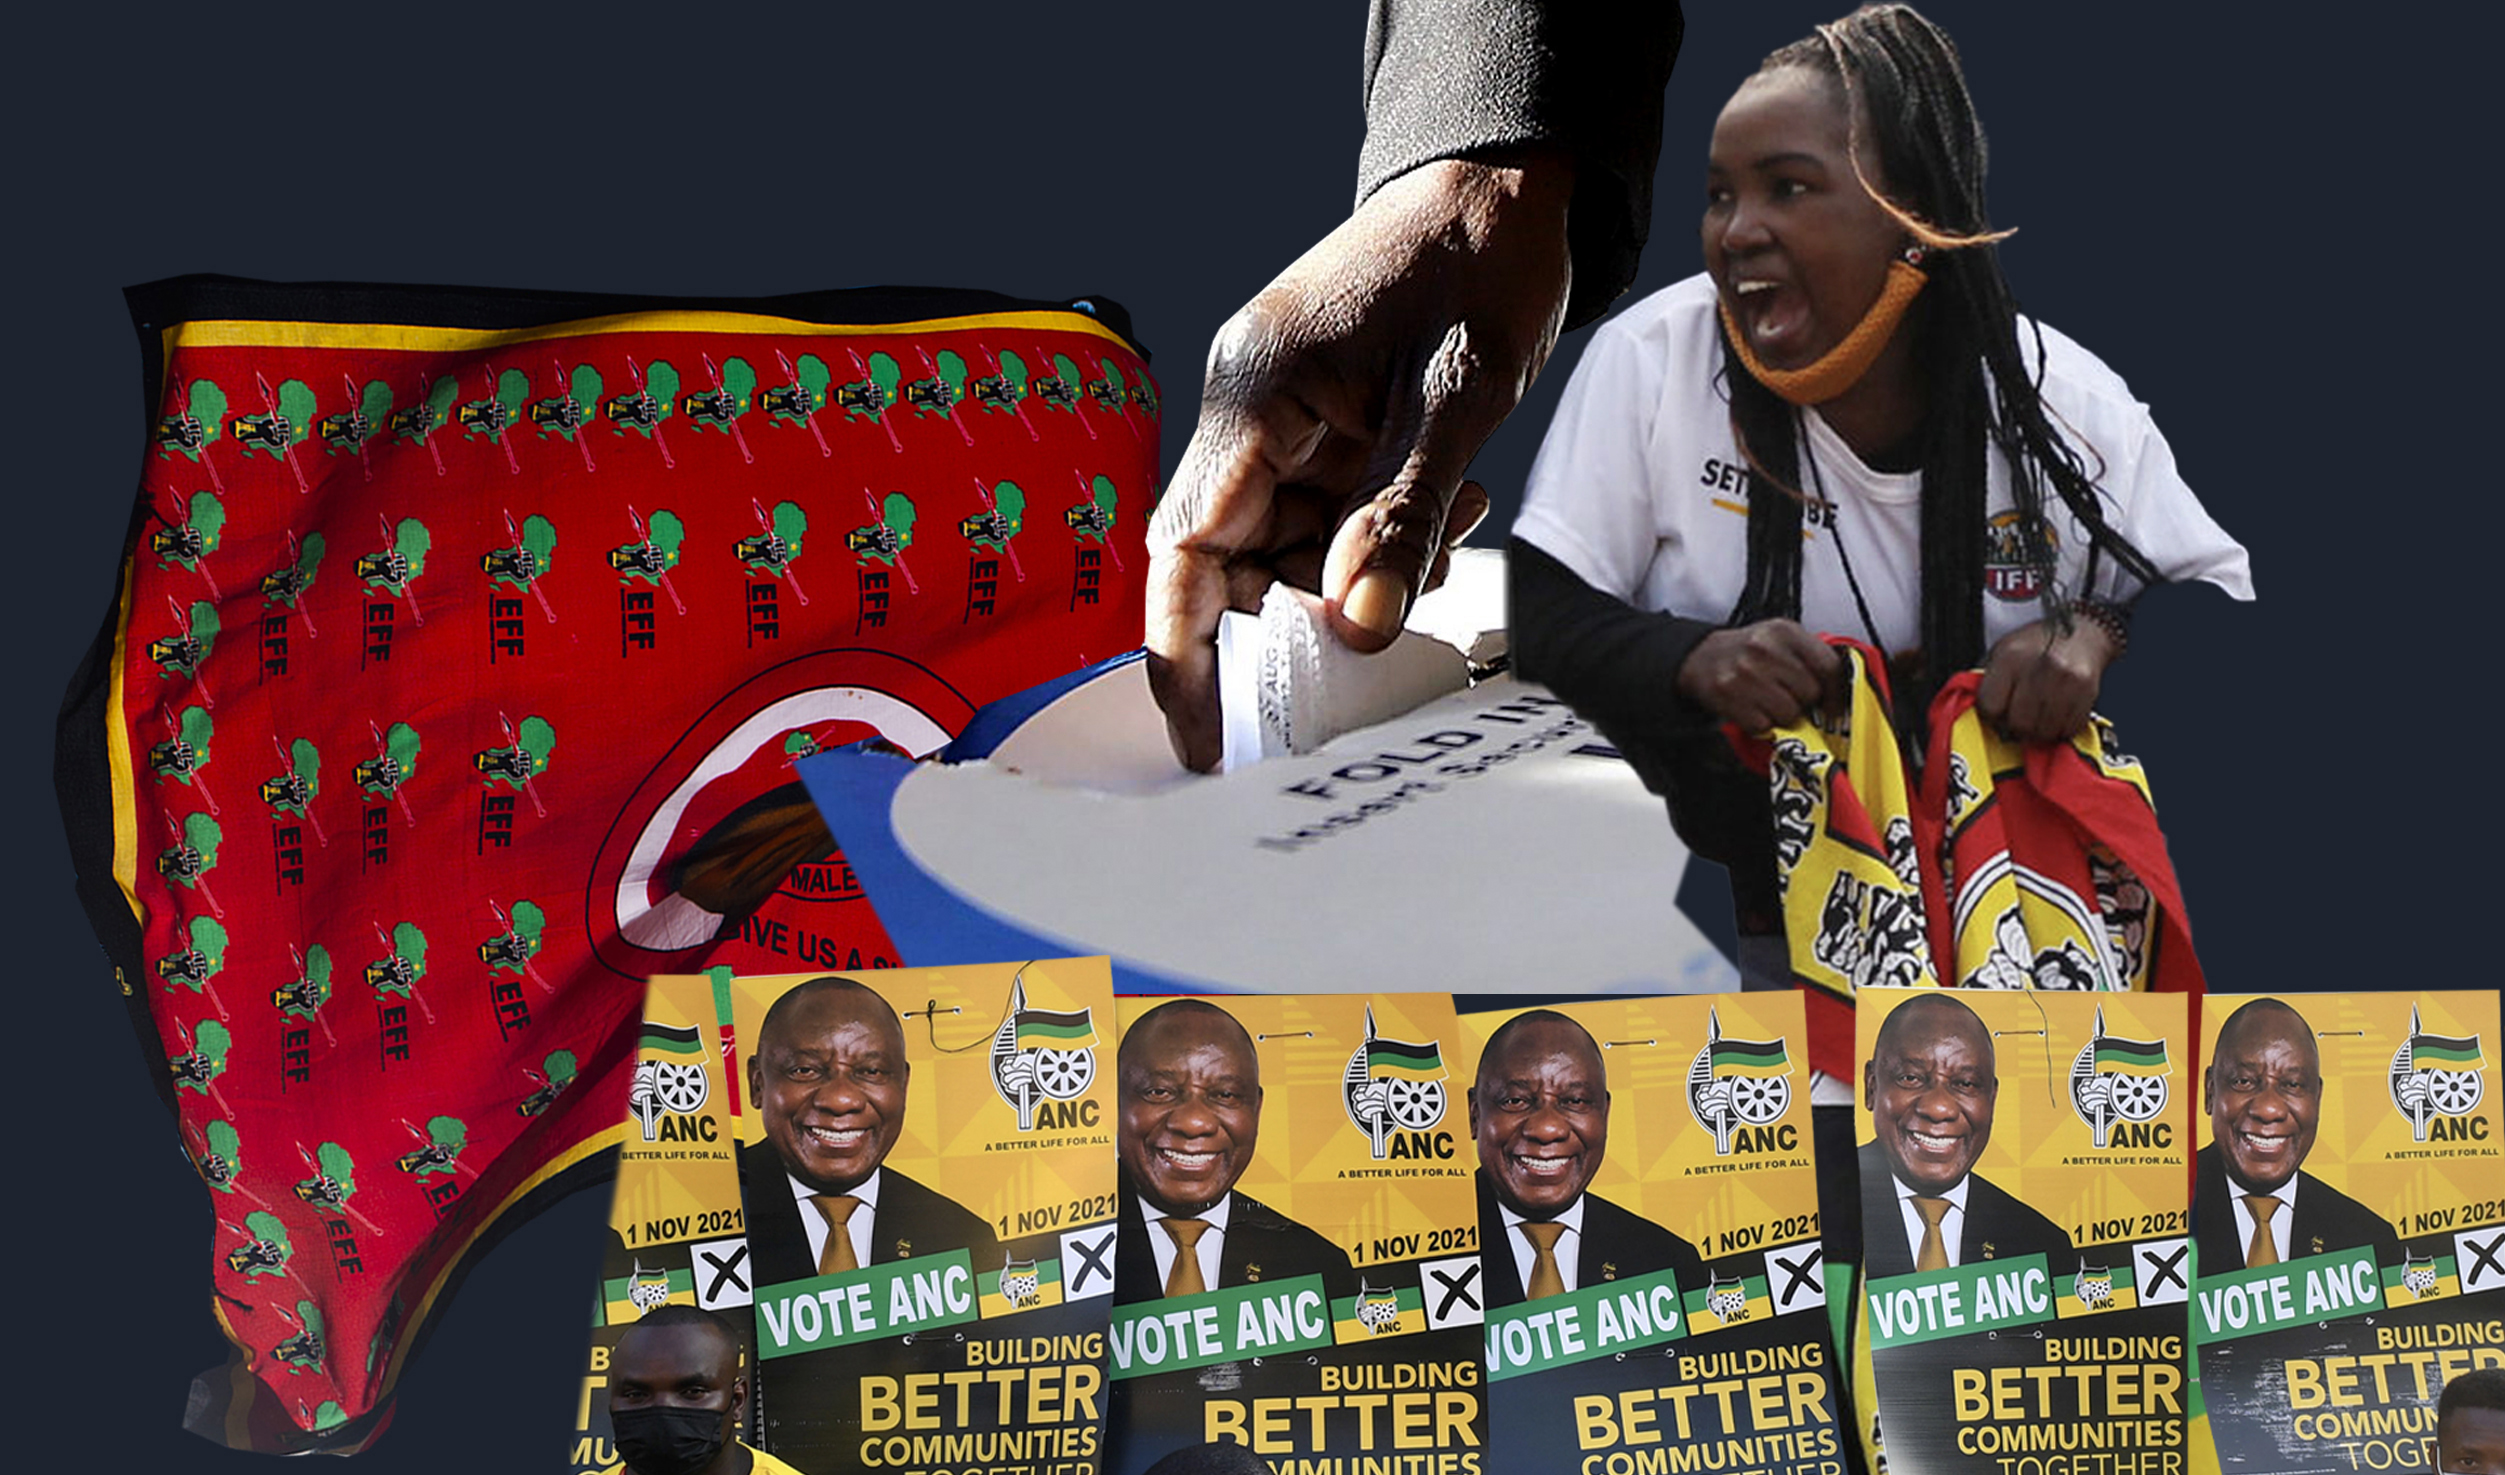 anc crushes opposition in kzn with resounding imbali victory, eff and ifp trail with middling results